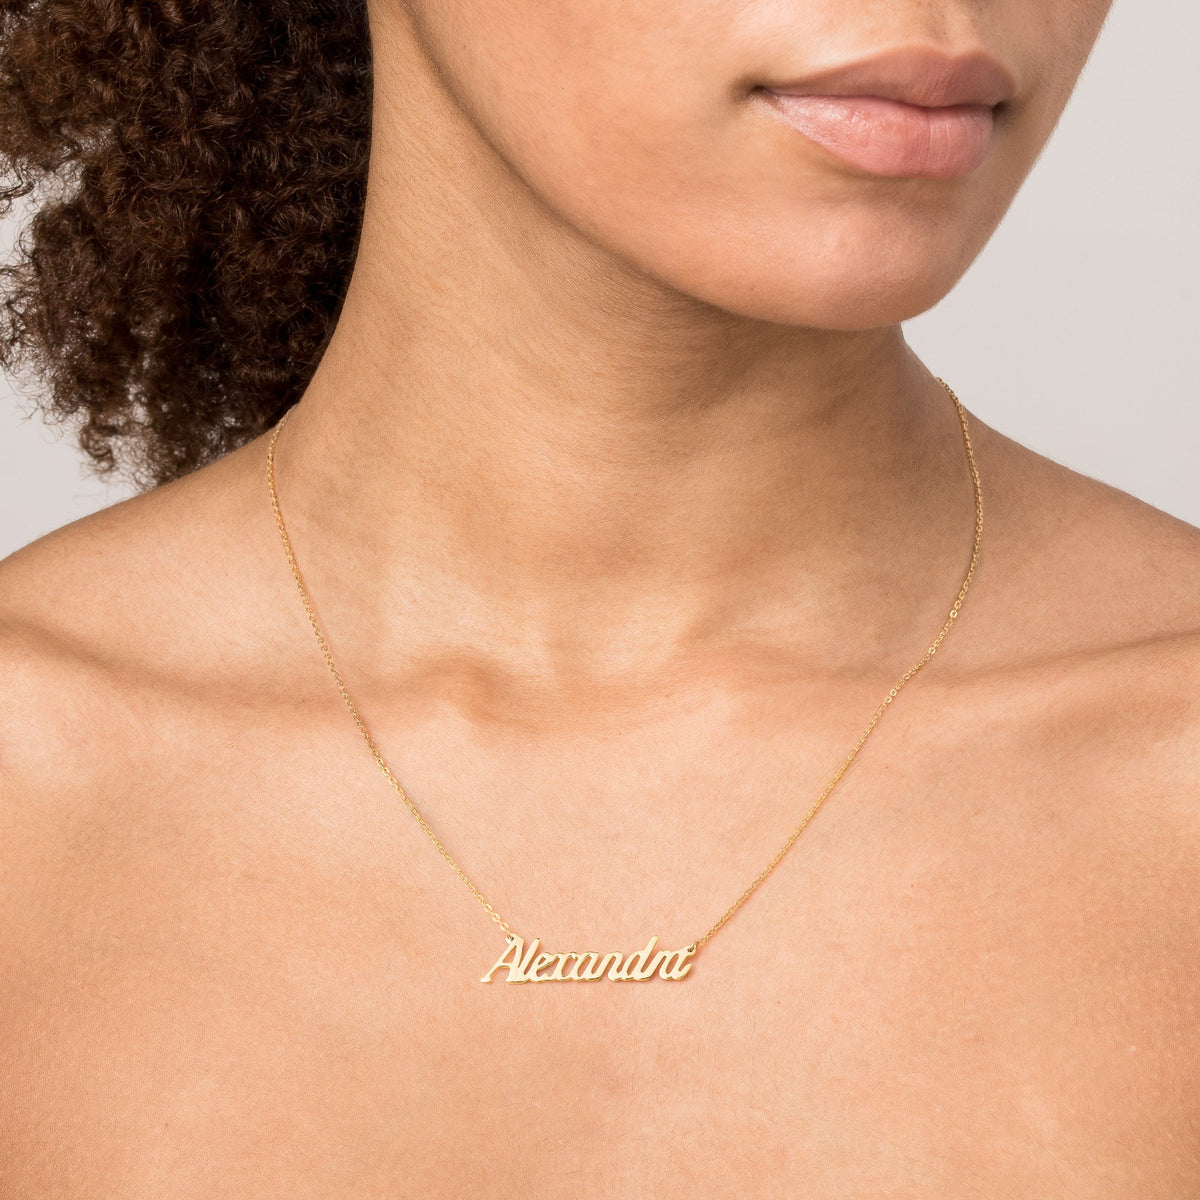 Gold Script Name Necklace in Yellow, Rose or White Gold